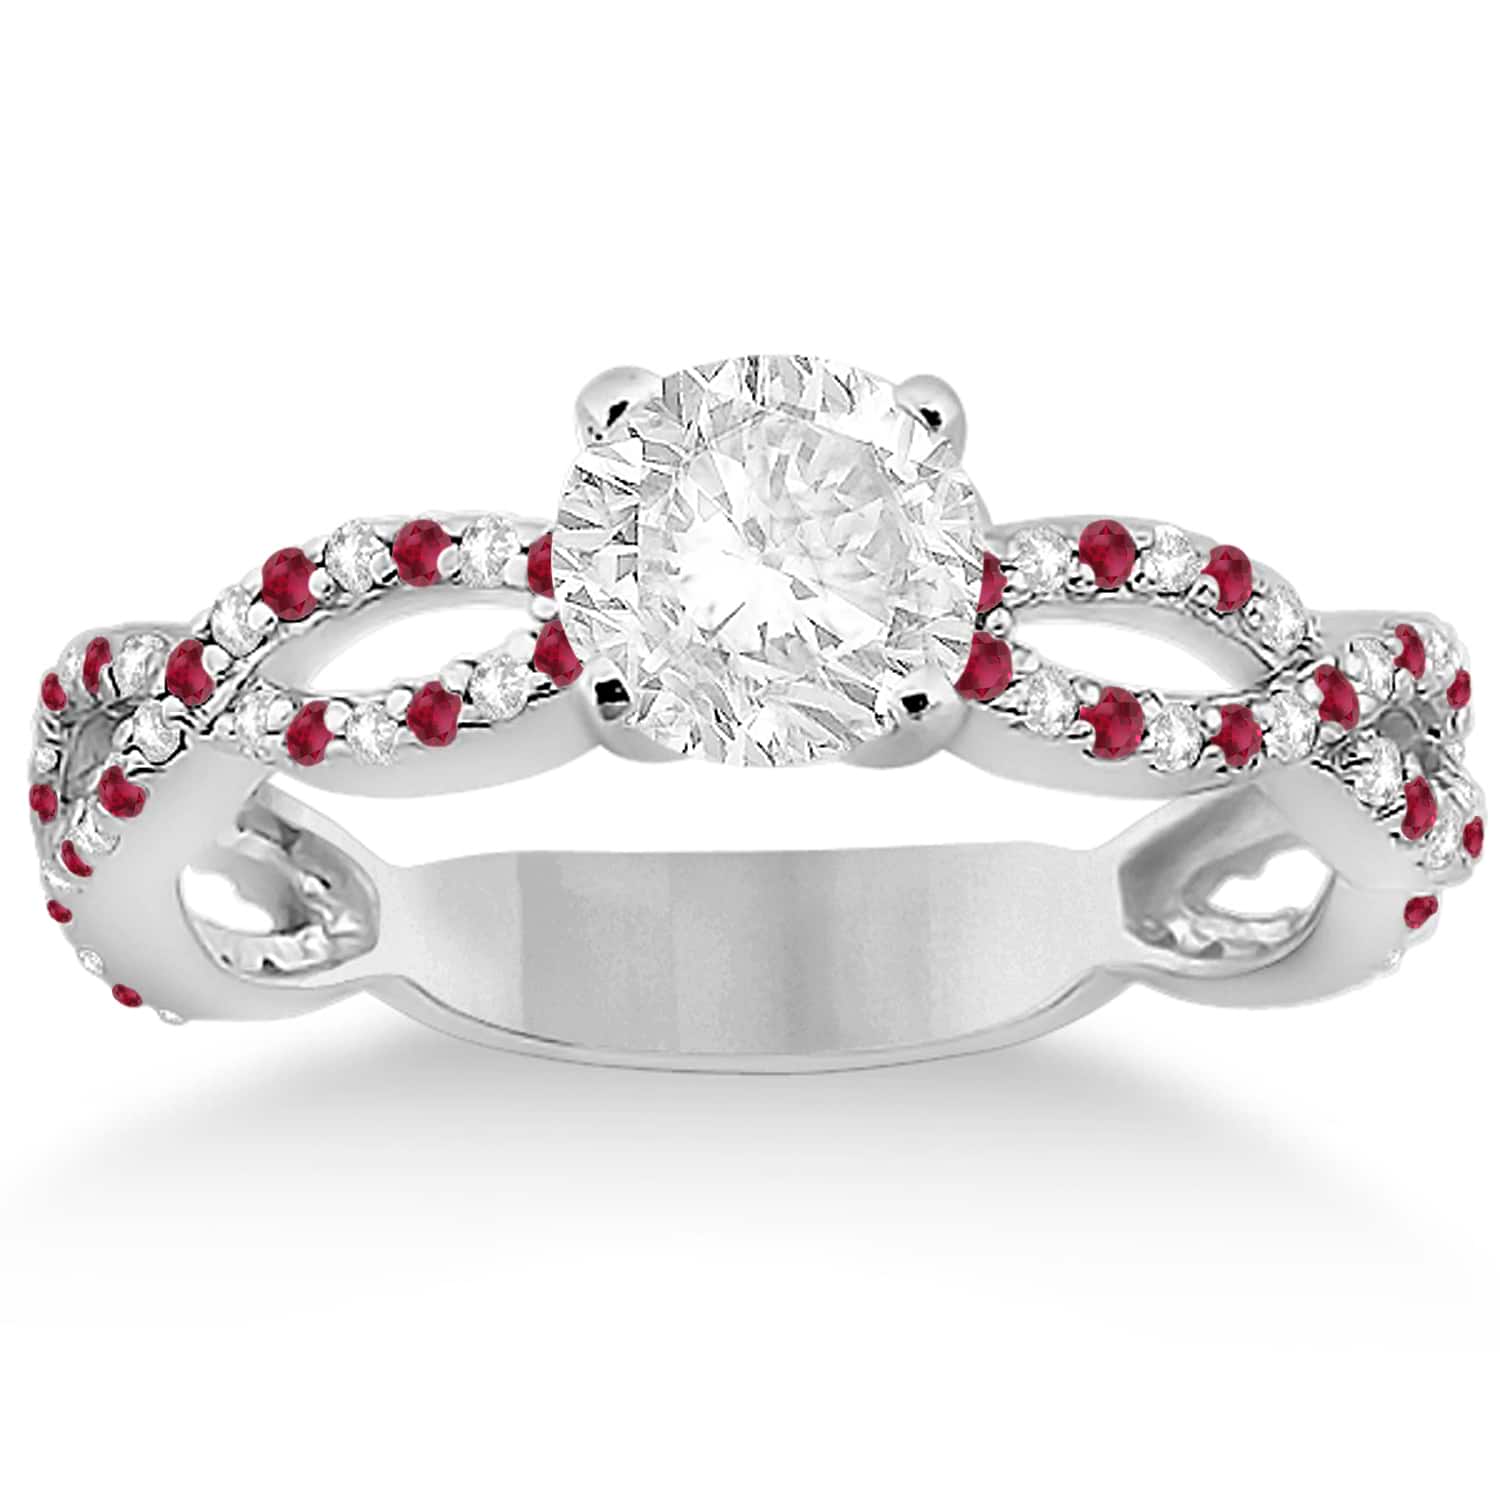 Pave Diamond & Ruby  Infinity Eternity Engagement Ring 18k White Gold (0.40ct)